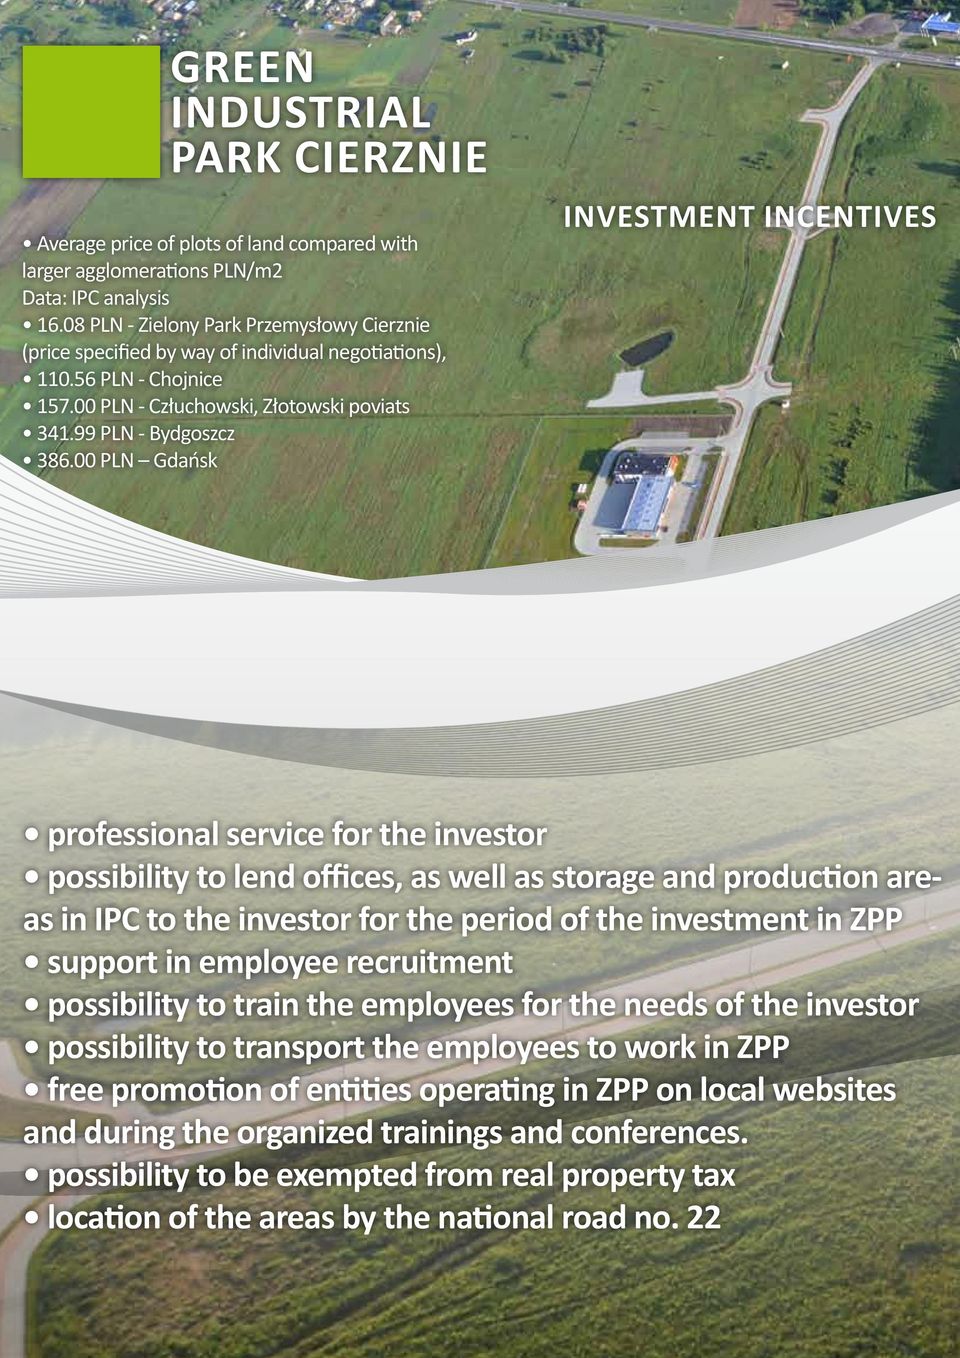 00 PLN Gdańsk Investment incentives professional service for the investor possibility to lend offices, as well as storage and production areas in IPC to the investor for the period of the investment